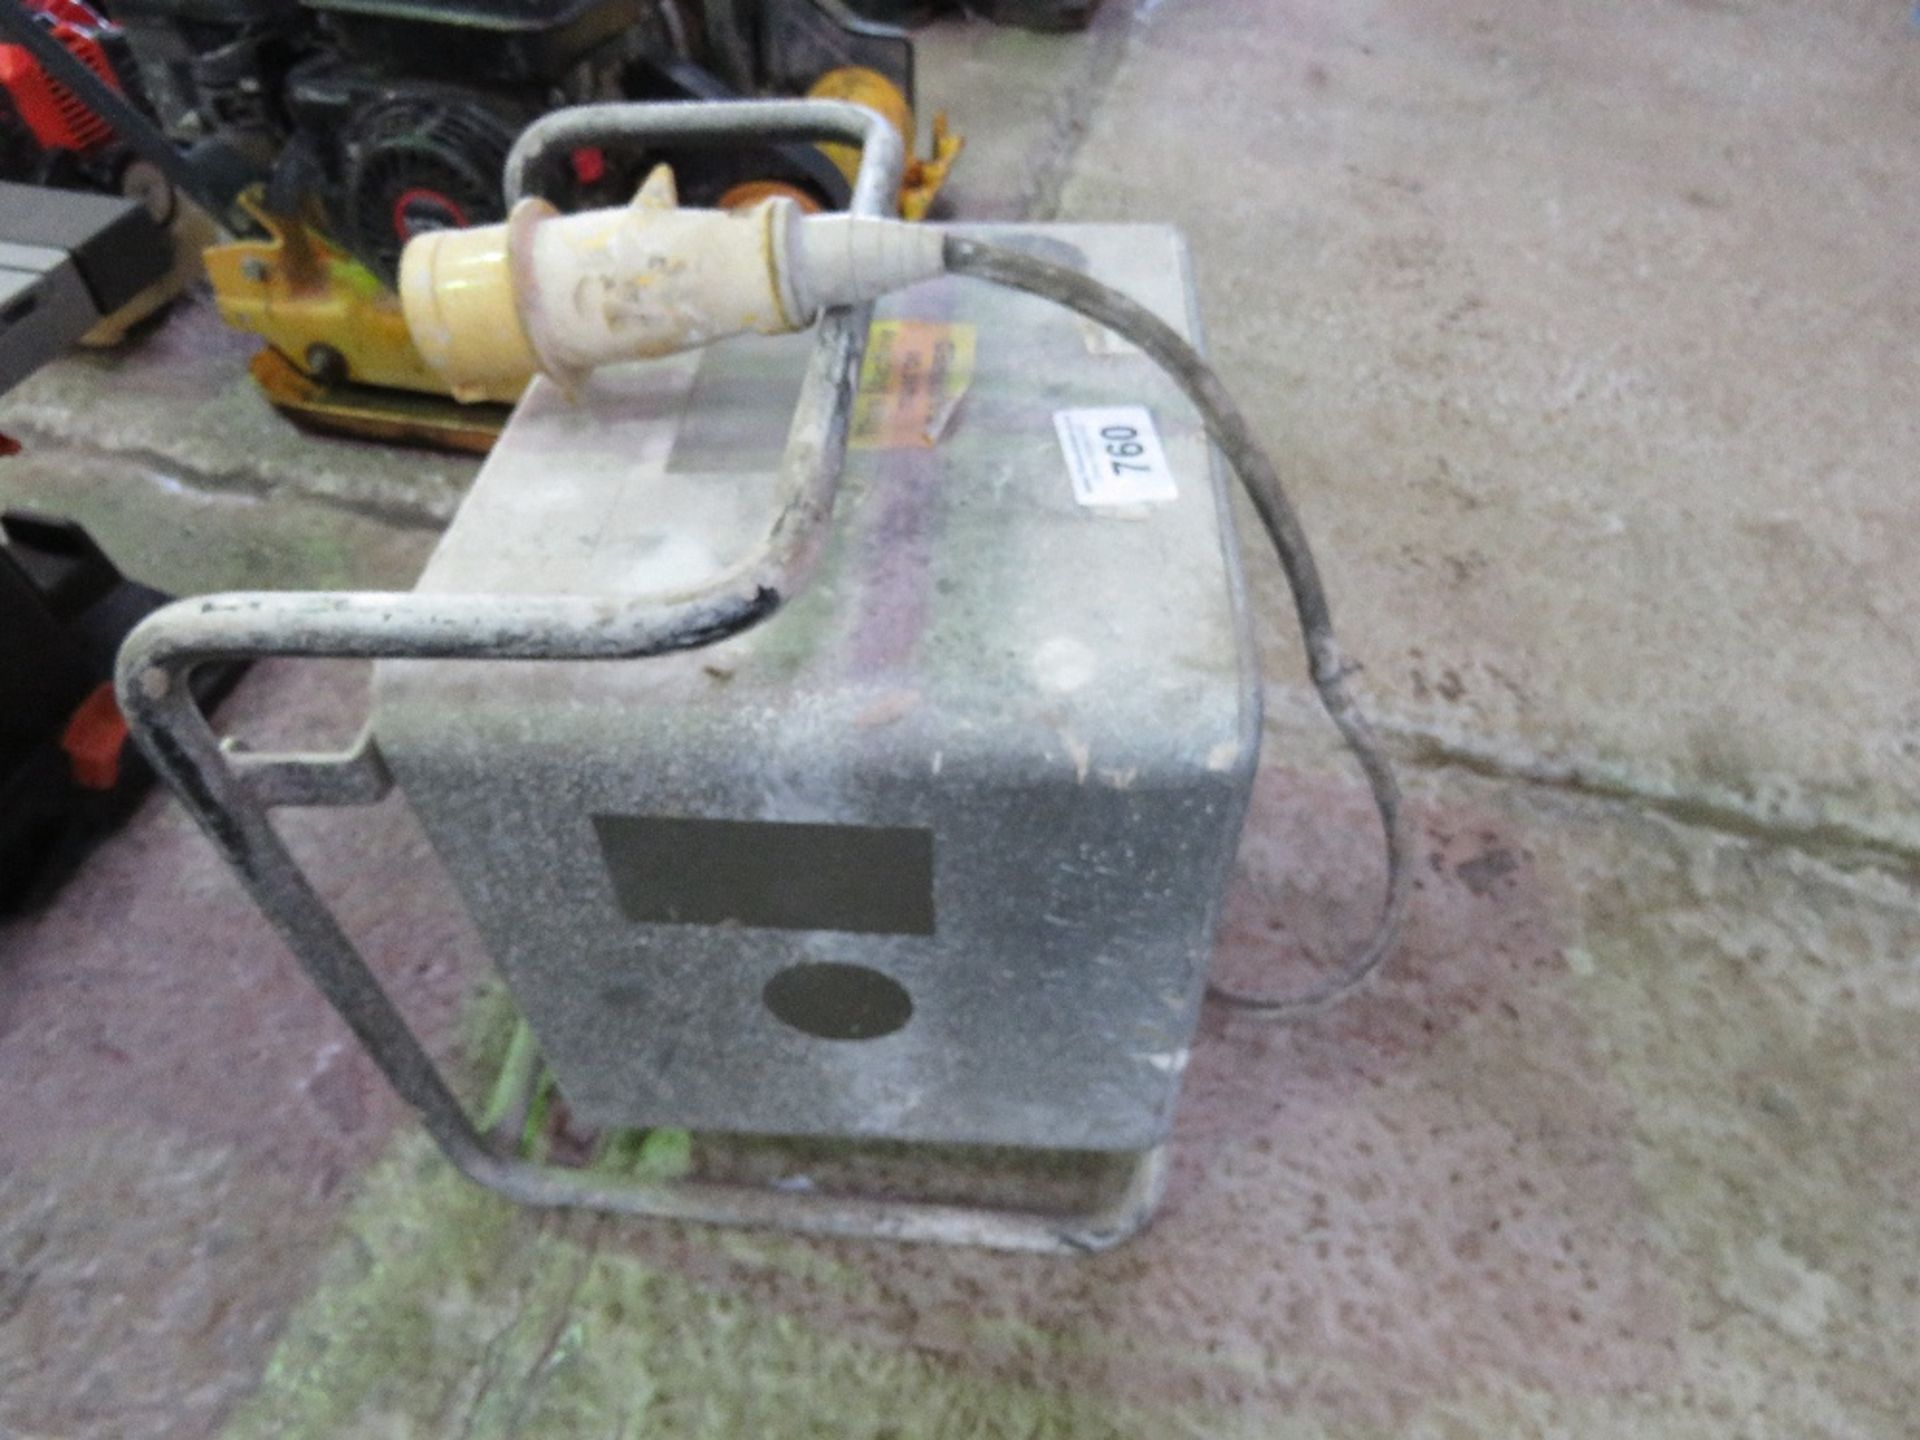 110VOLT FAN HEATER. DIRECT FROM A LOCAL GROUNDWORKS COMPANY AS PART OF THEIR RESTRUCTURING PROGRA - Image 3 of 3